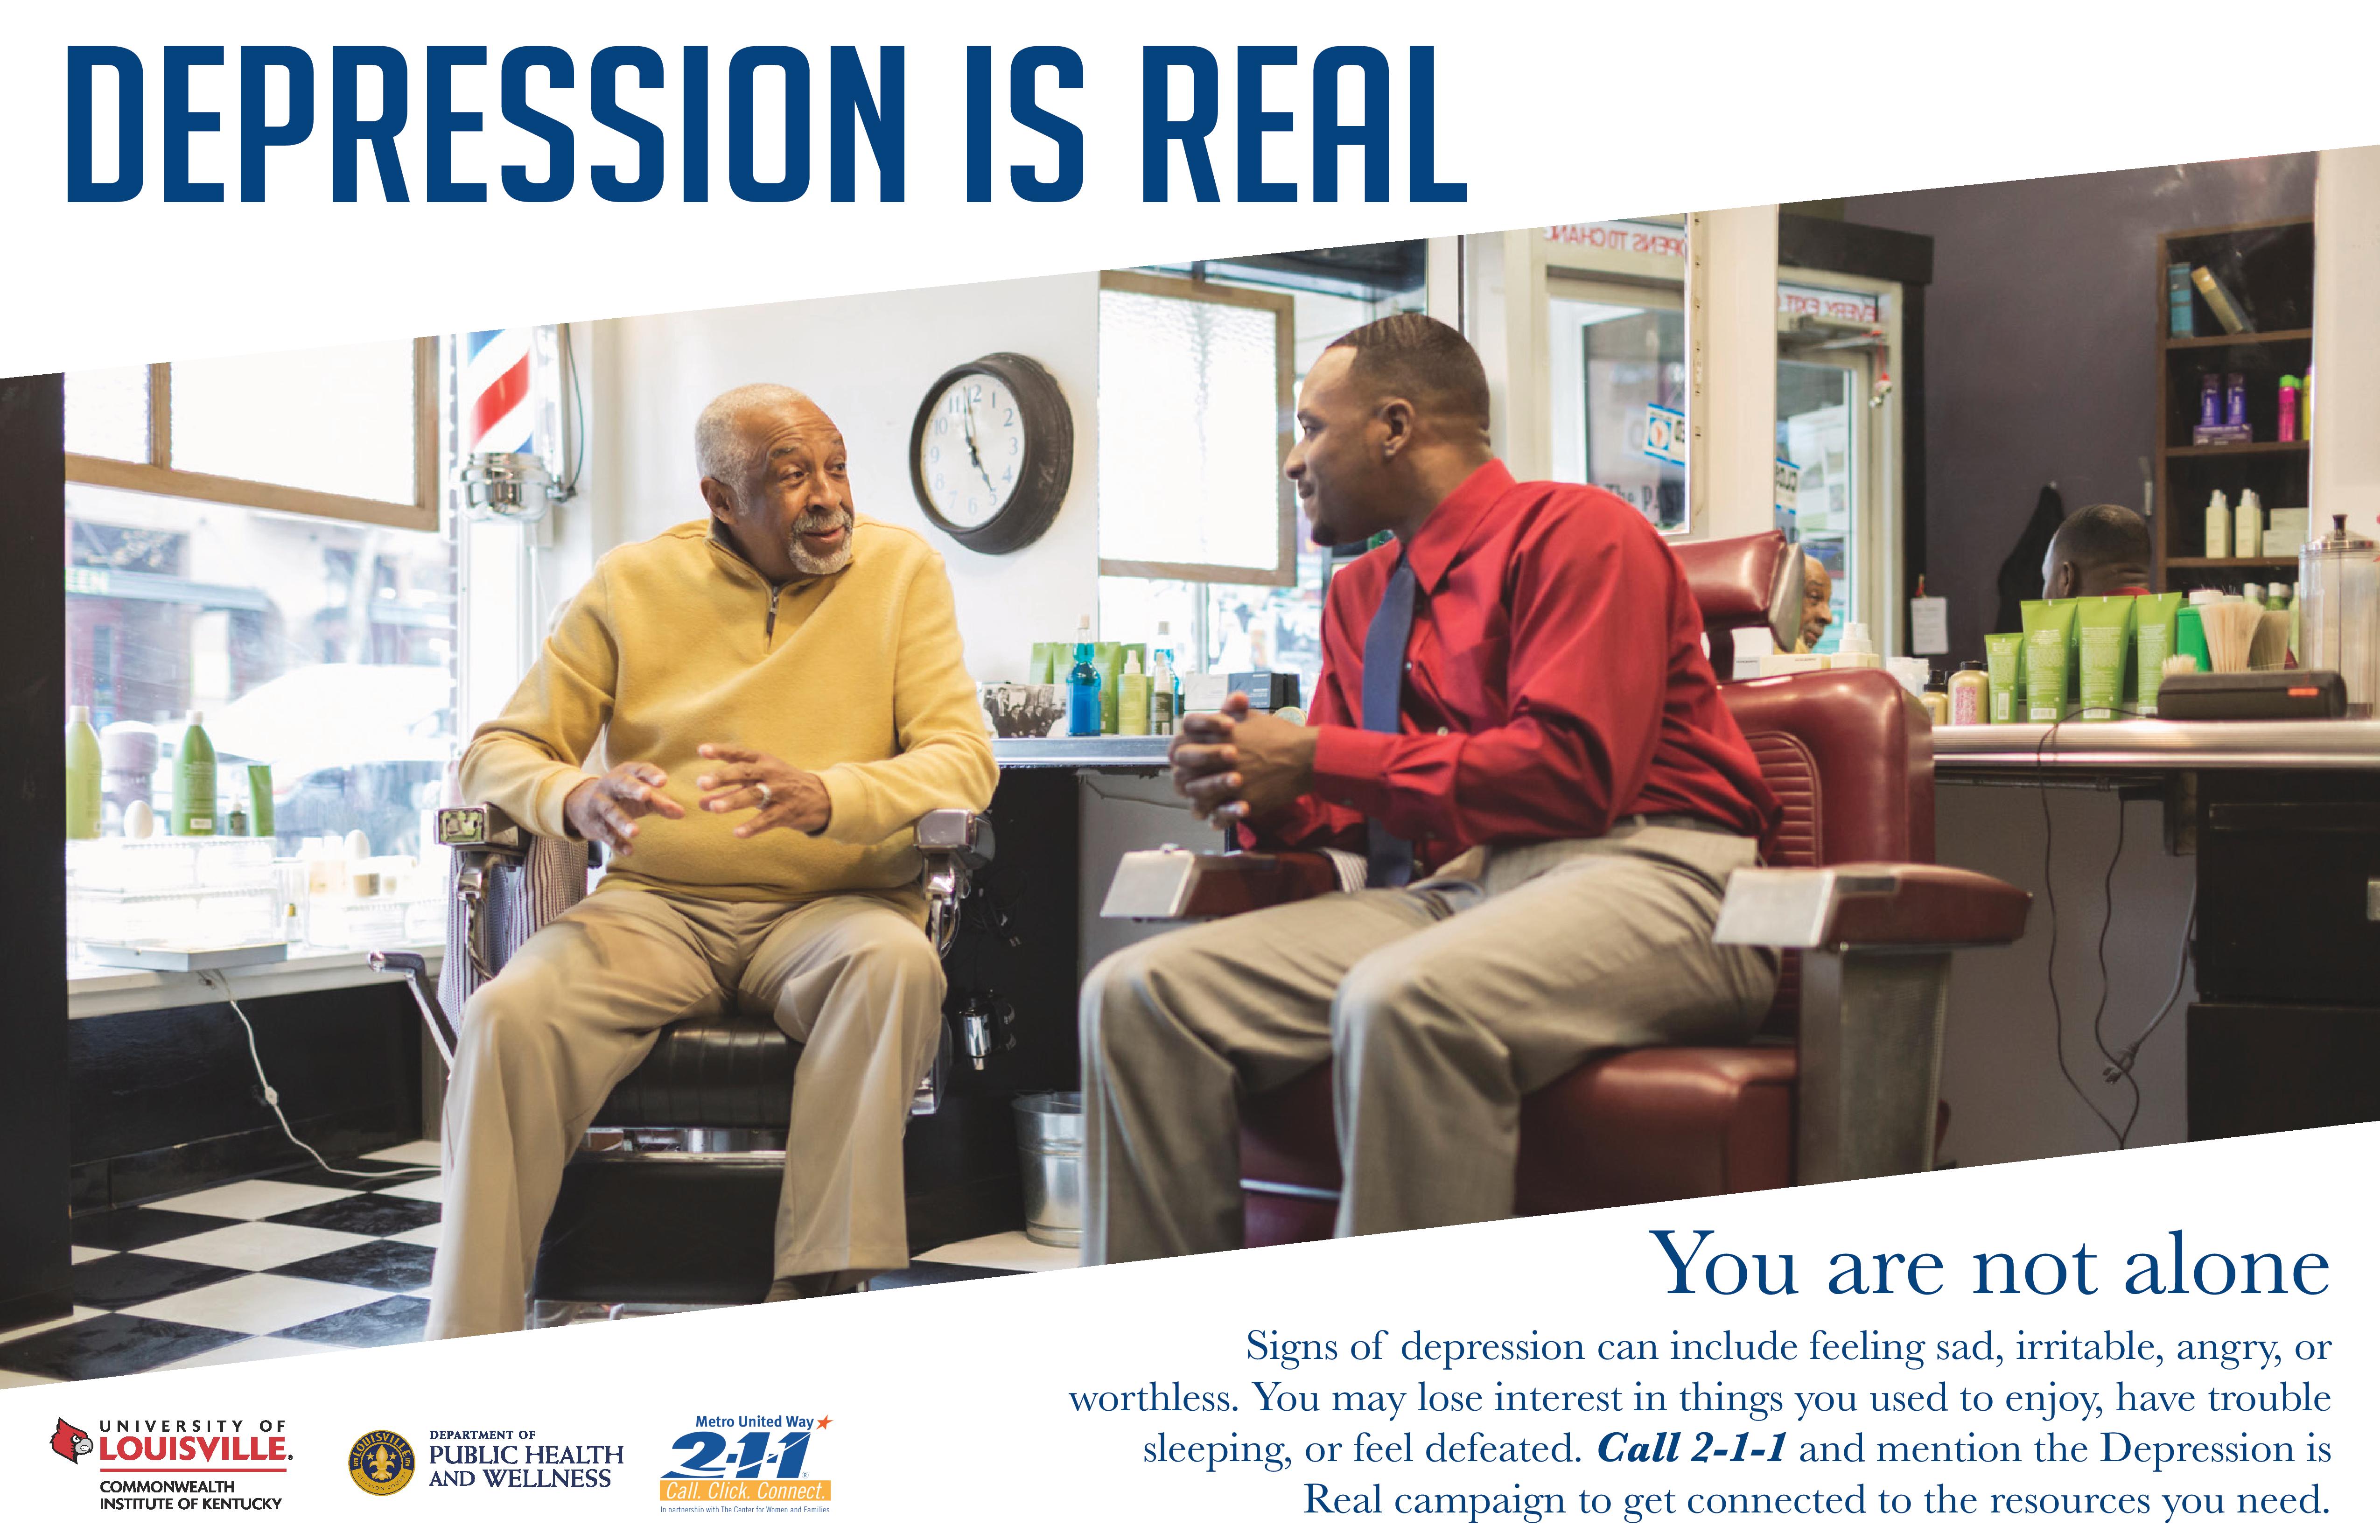 Health literacy campaign focused on depression in African Americans